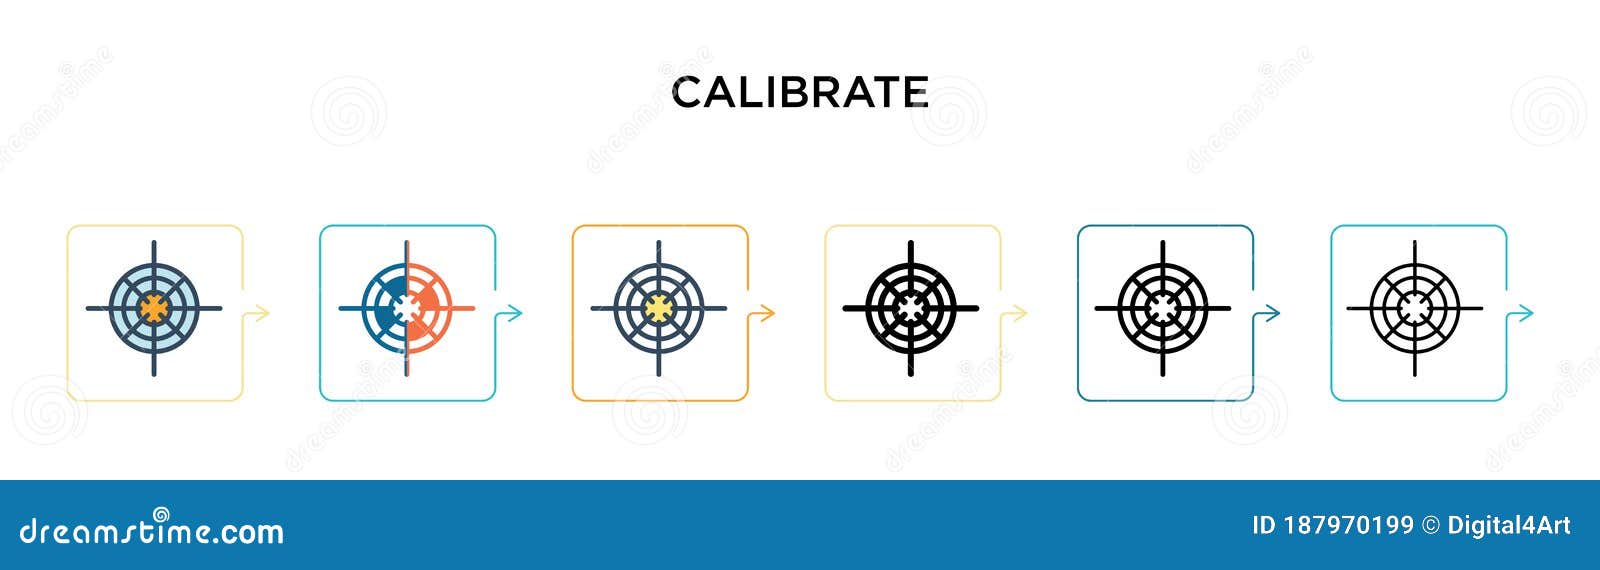 calibrate  icon in 6 different modern styles. black, two colored calibrate icons ed in filled, outline, line and